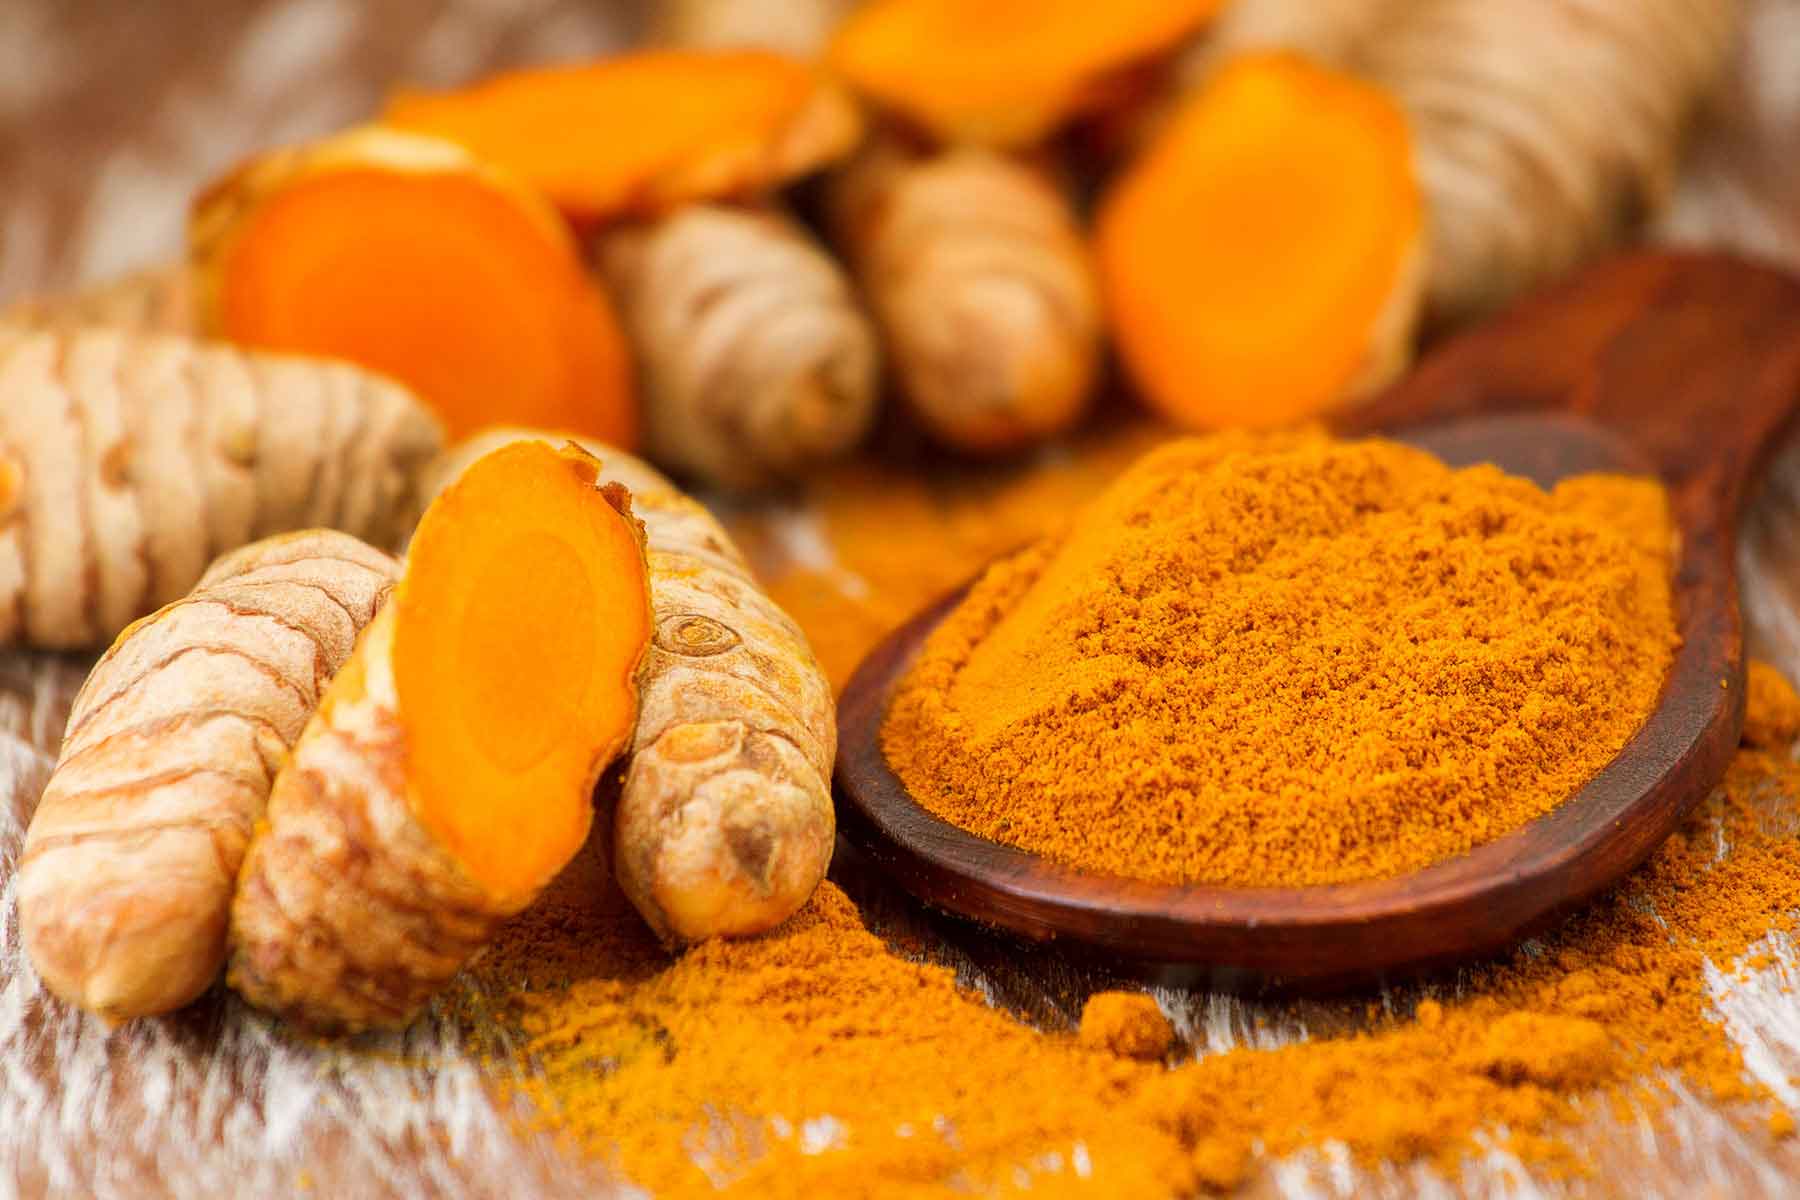 Turmeric A Natural Way to Treat Muscle Pain